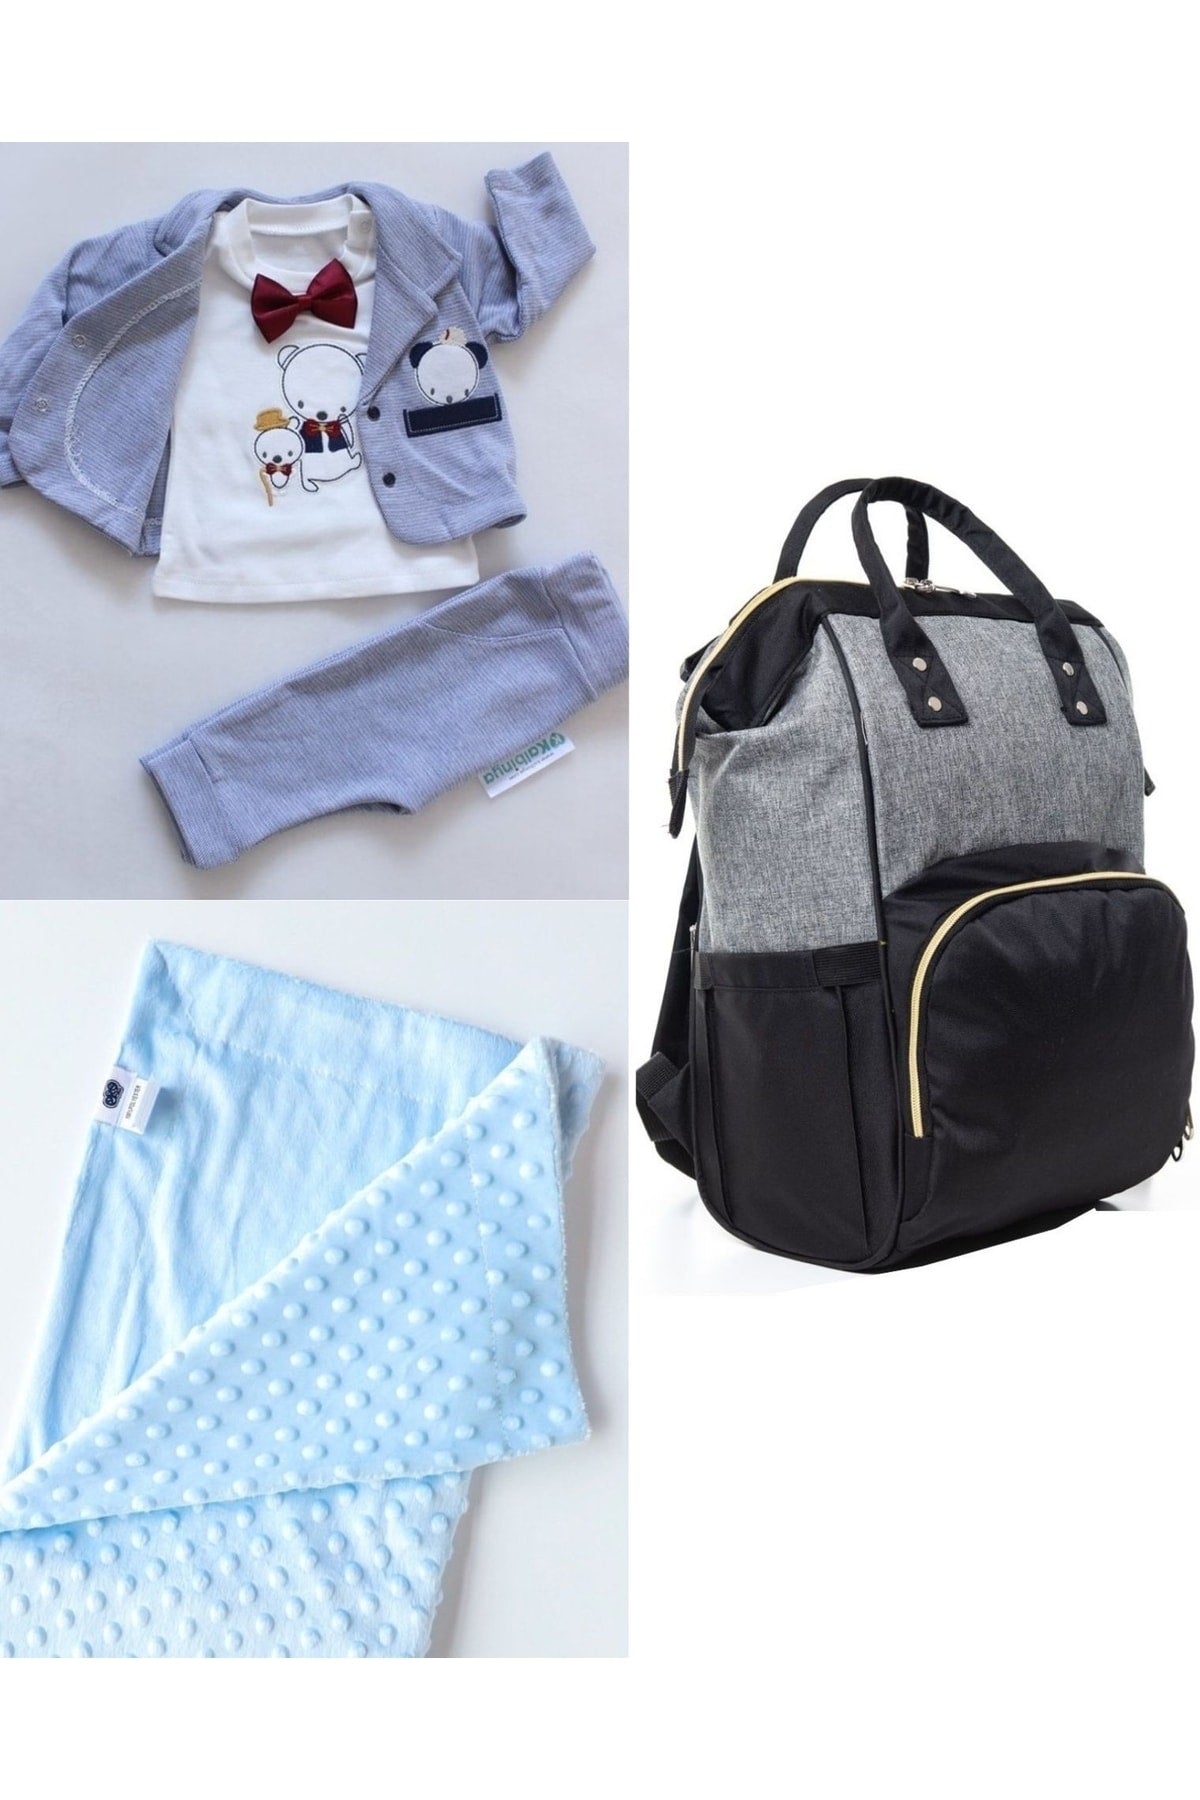 Functional Mother Baby Care Backpack, 100% Cotton Hospital Outlet And Chickpea Blanket Set